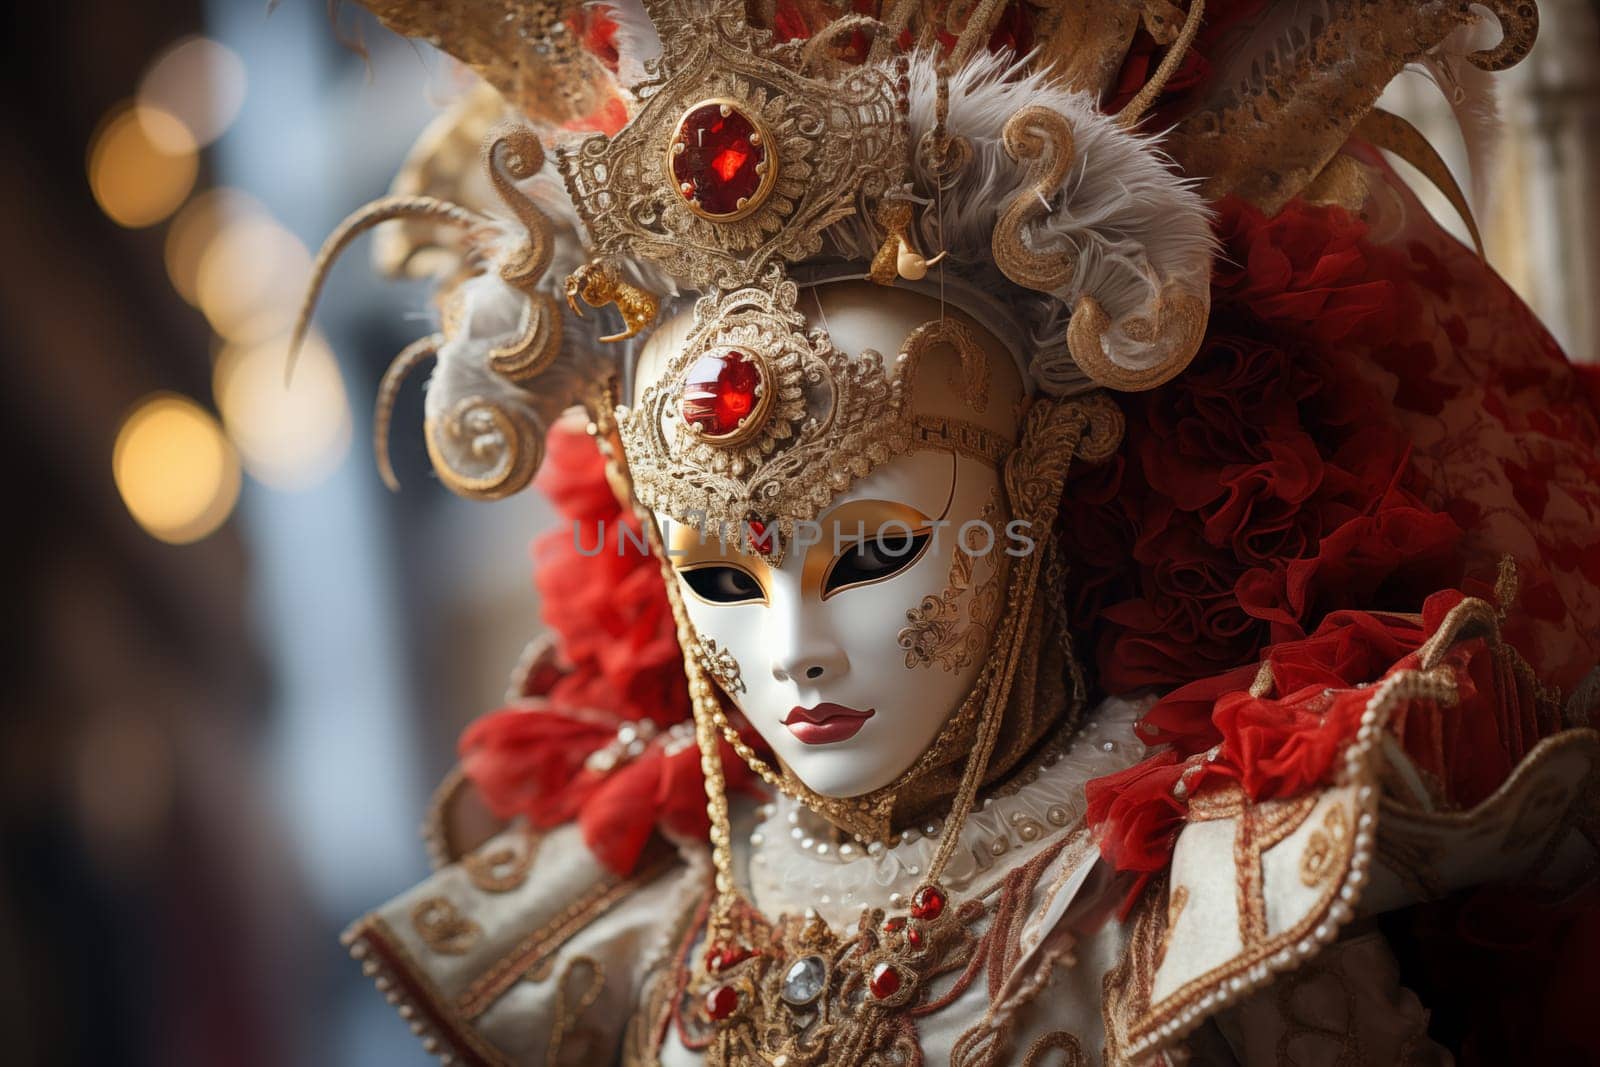 A person adorned in a richly detailed and colorful carnival costume, complete with an elaborate mask, participates in the iconic Venice Carnival